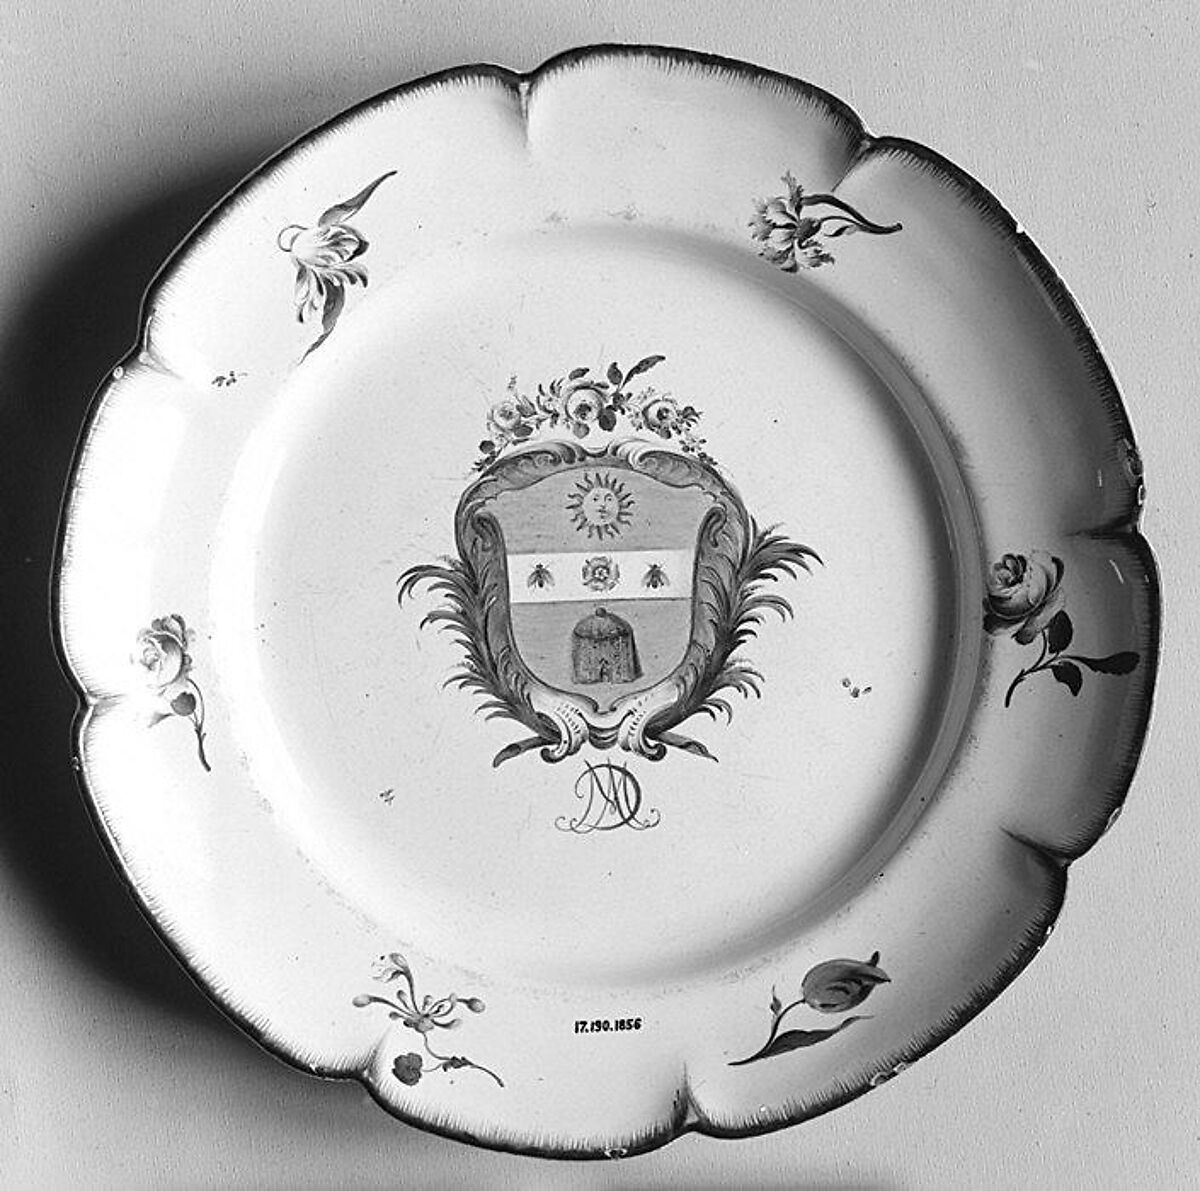 Plate, Faience (tin-glazed earthenware), French, Lunéville 